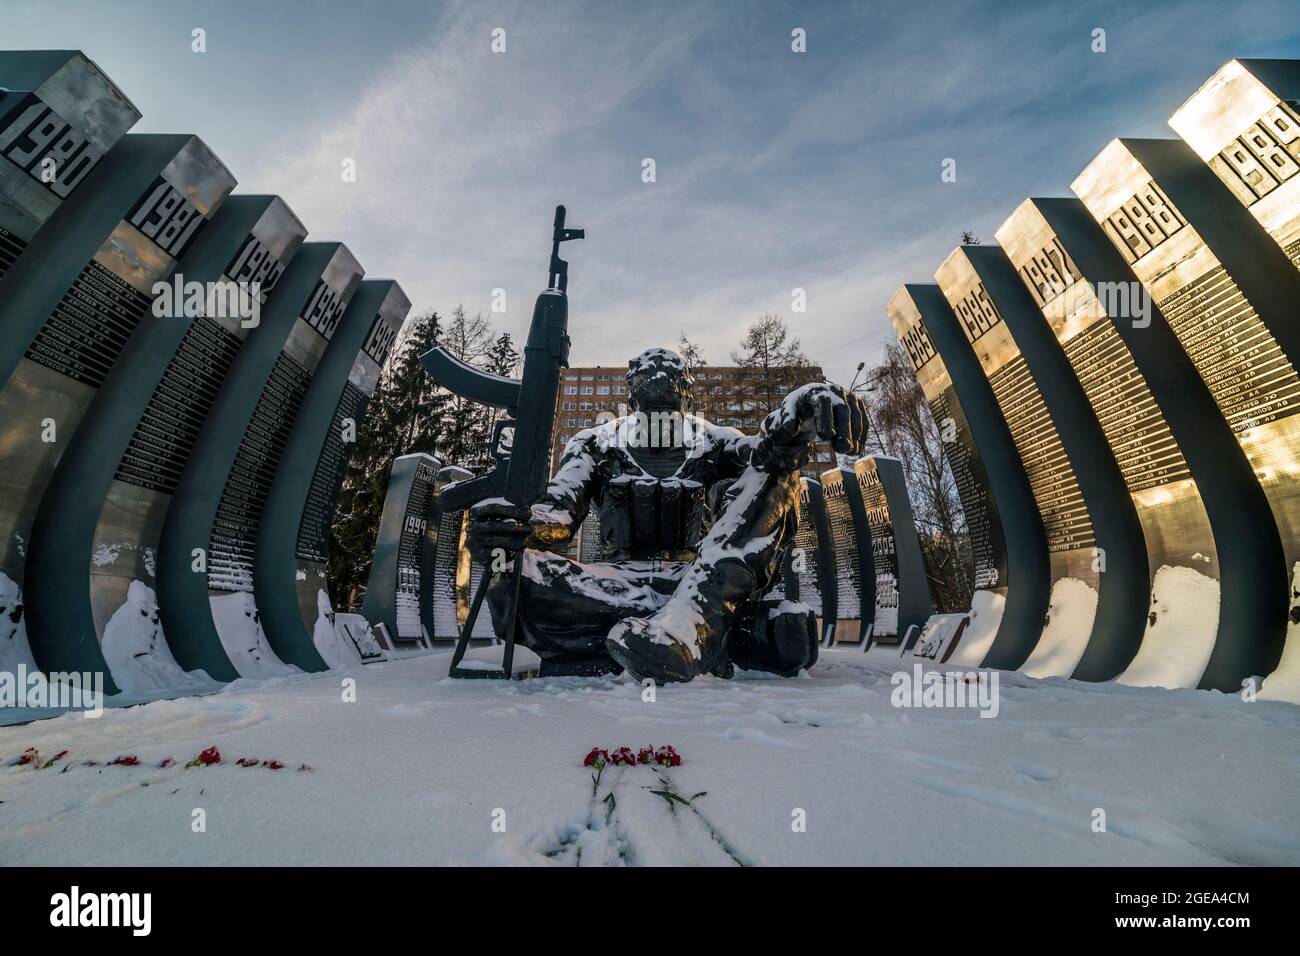 Roses grace the freshly fallen snow in front of the Afghanistan War Memorial known as the Black Tulip in downtown Ekaterinburg in Russia. Stock Photo